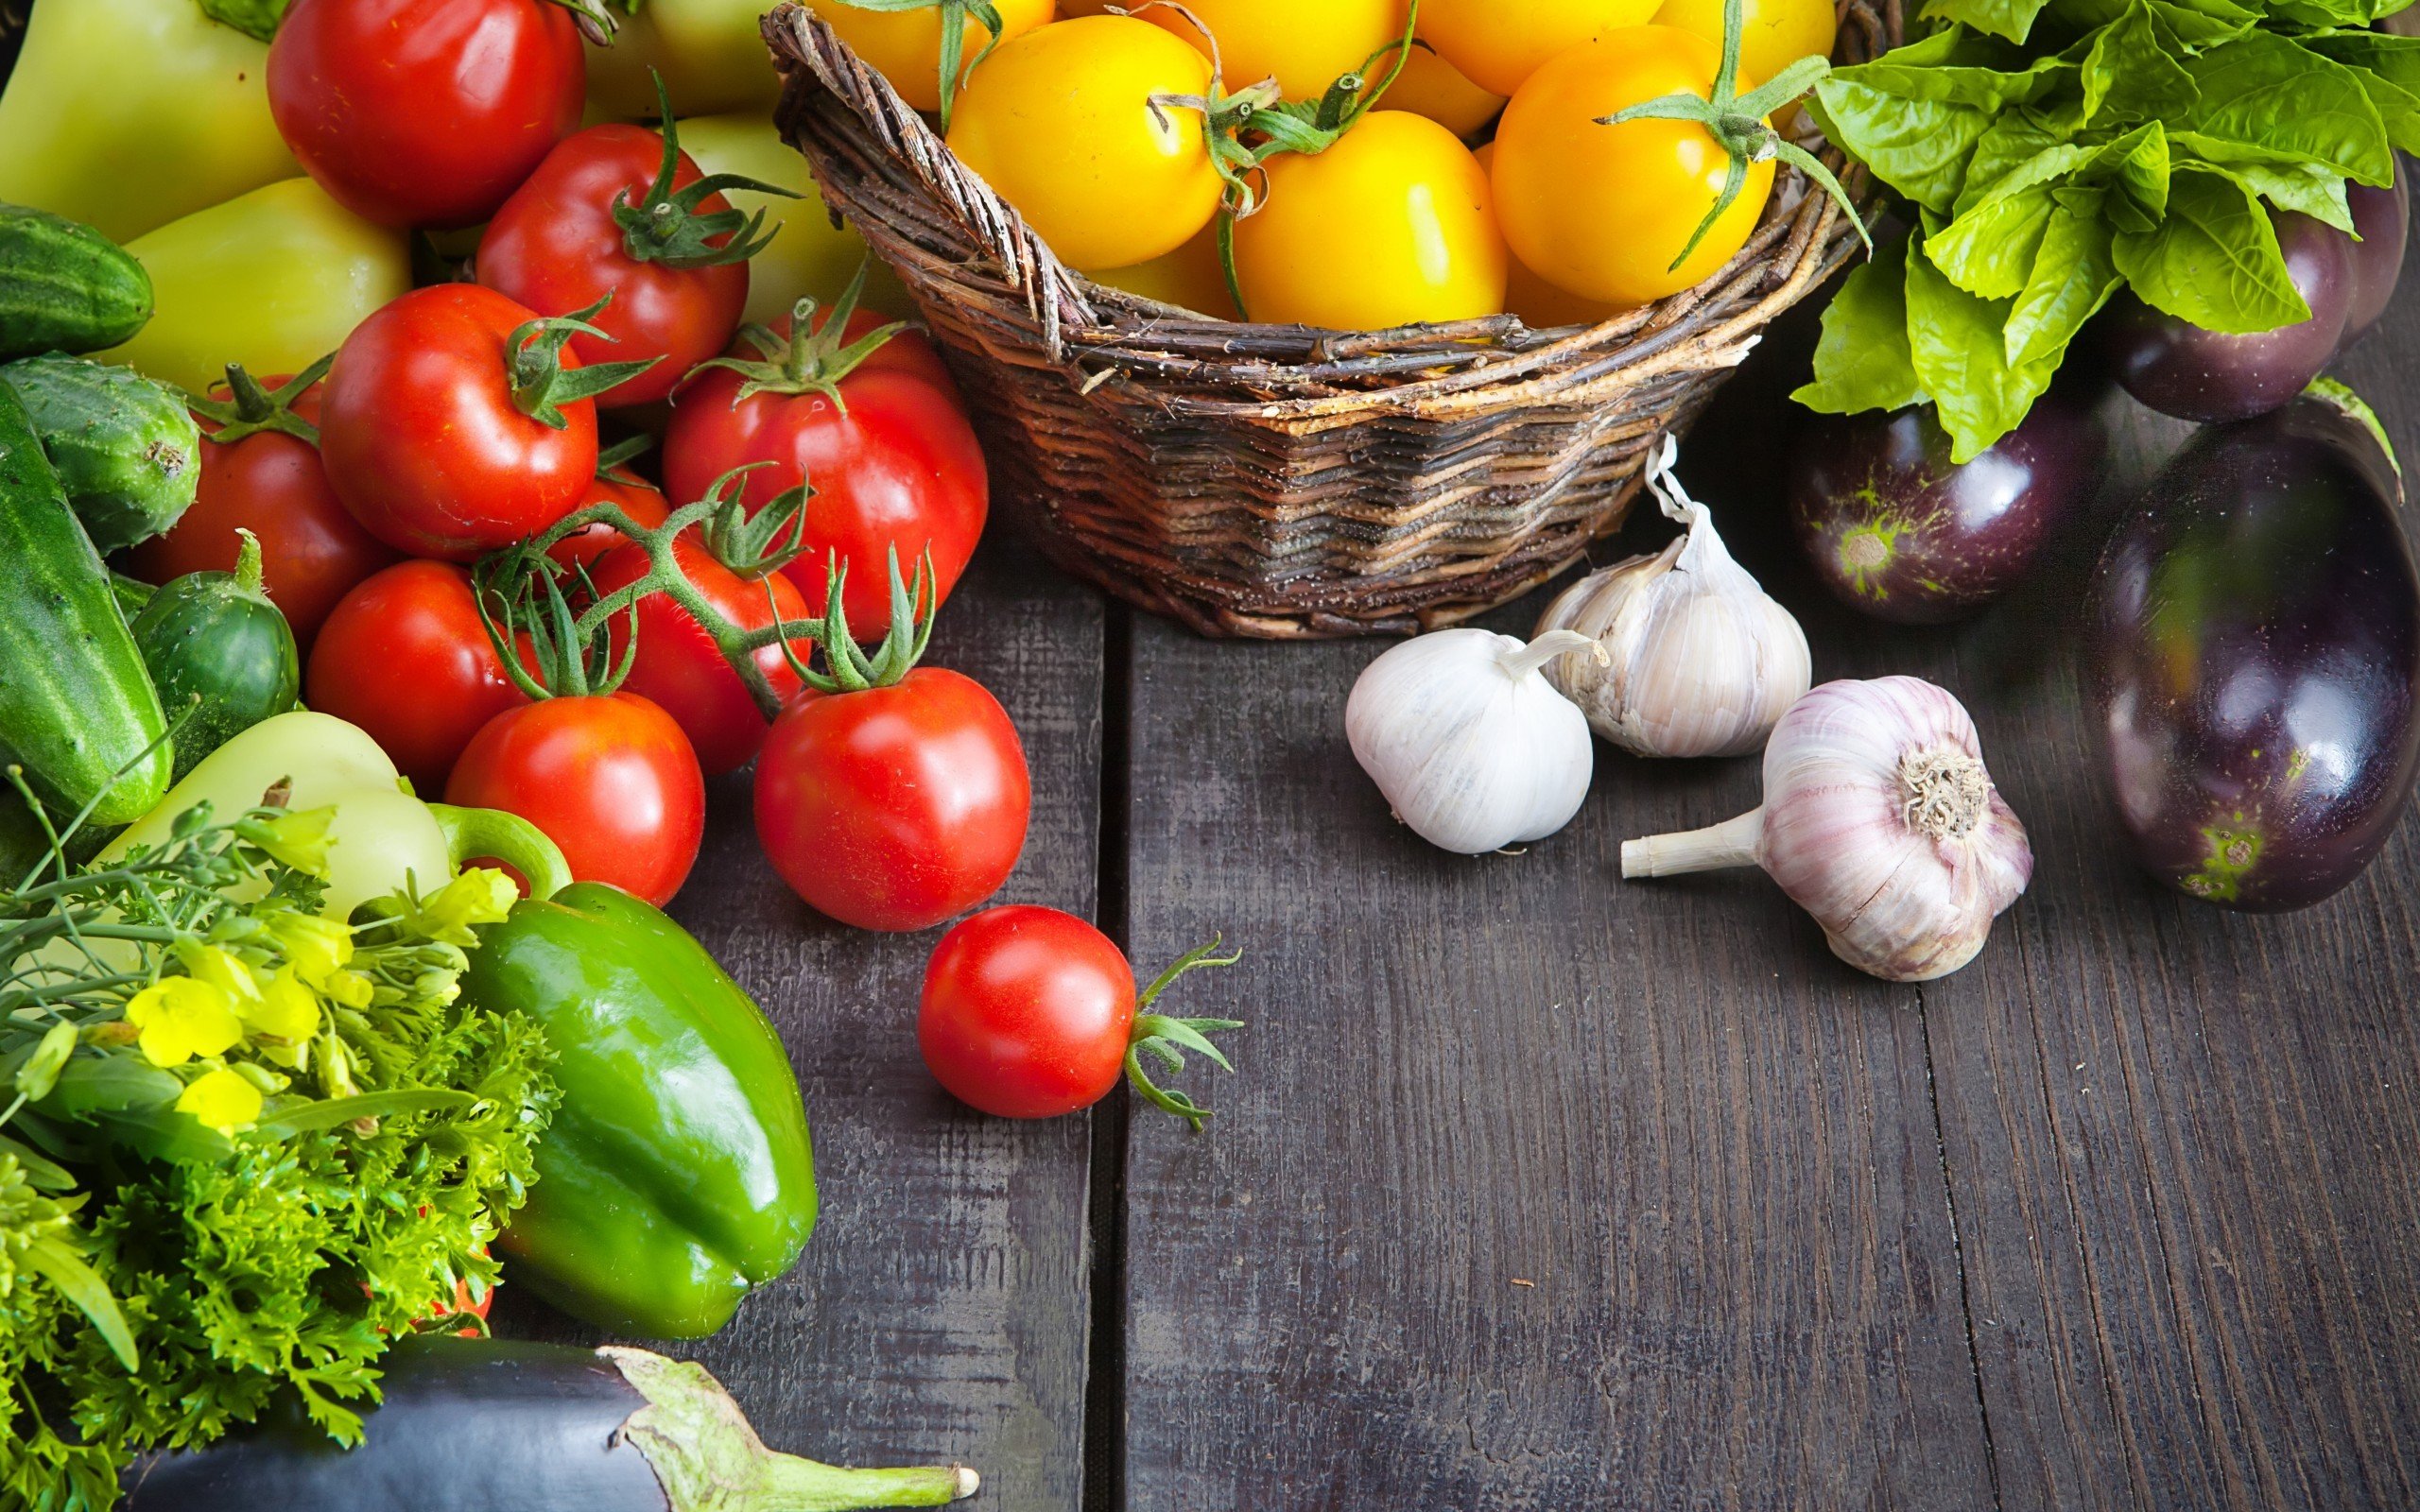 food, Vegetables, Tomatoes, Eggplant, Baskets, Wooden surface, Colorful Wallpaper